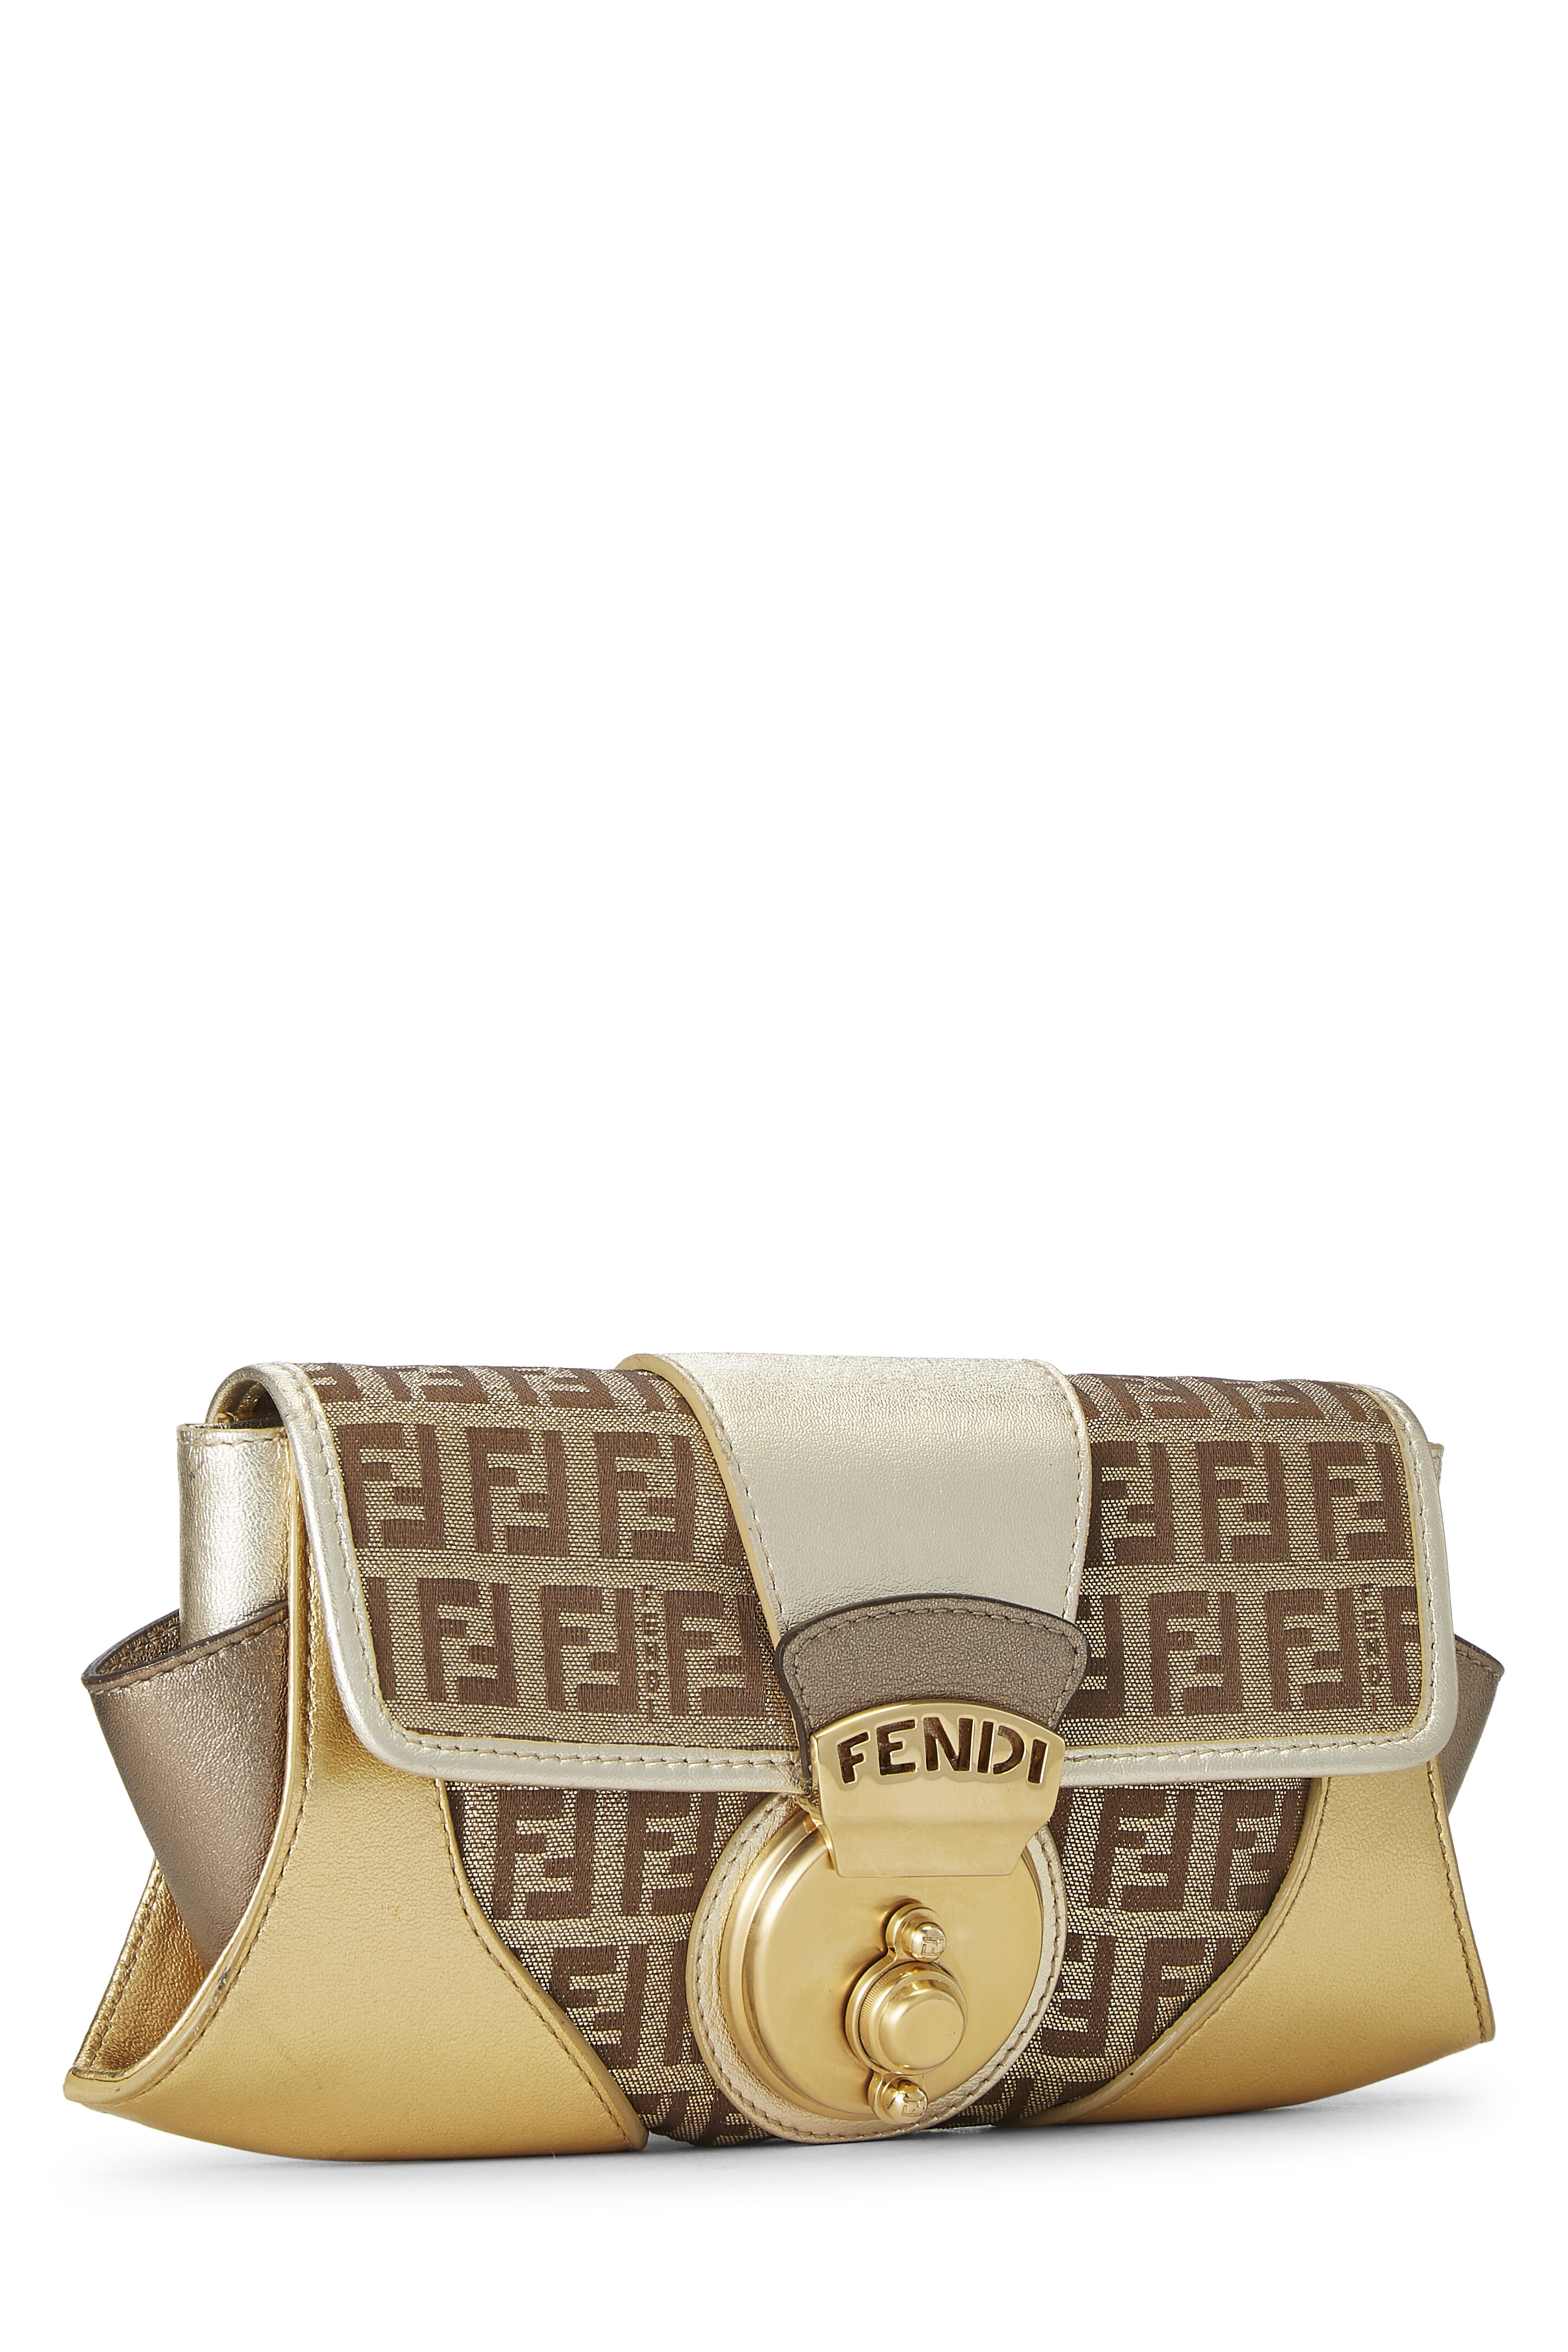 Vintage and Pre-Owned Fendi Handbags and Clothing 